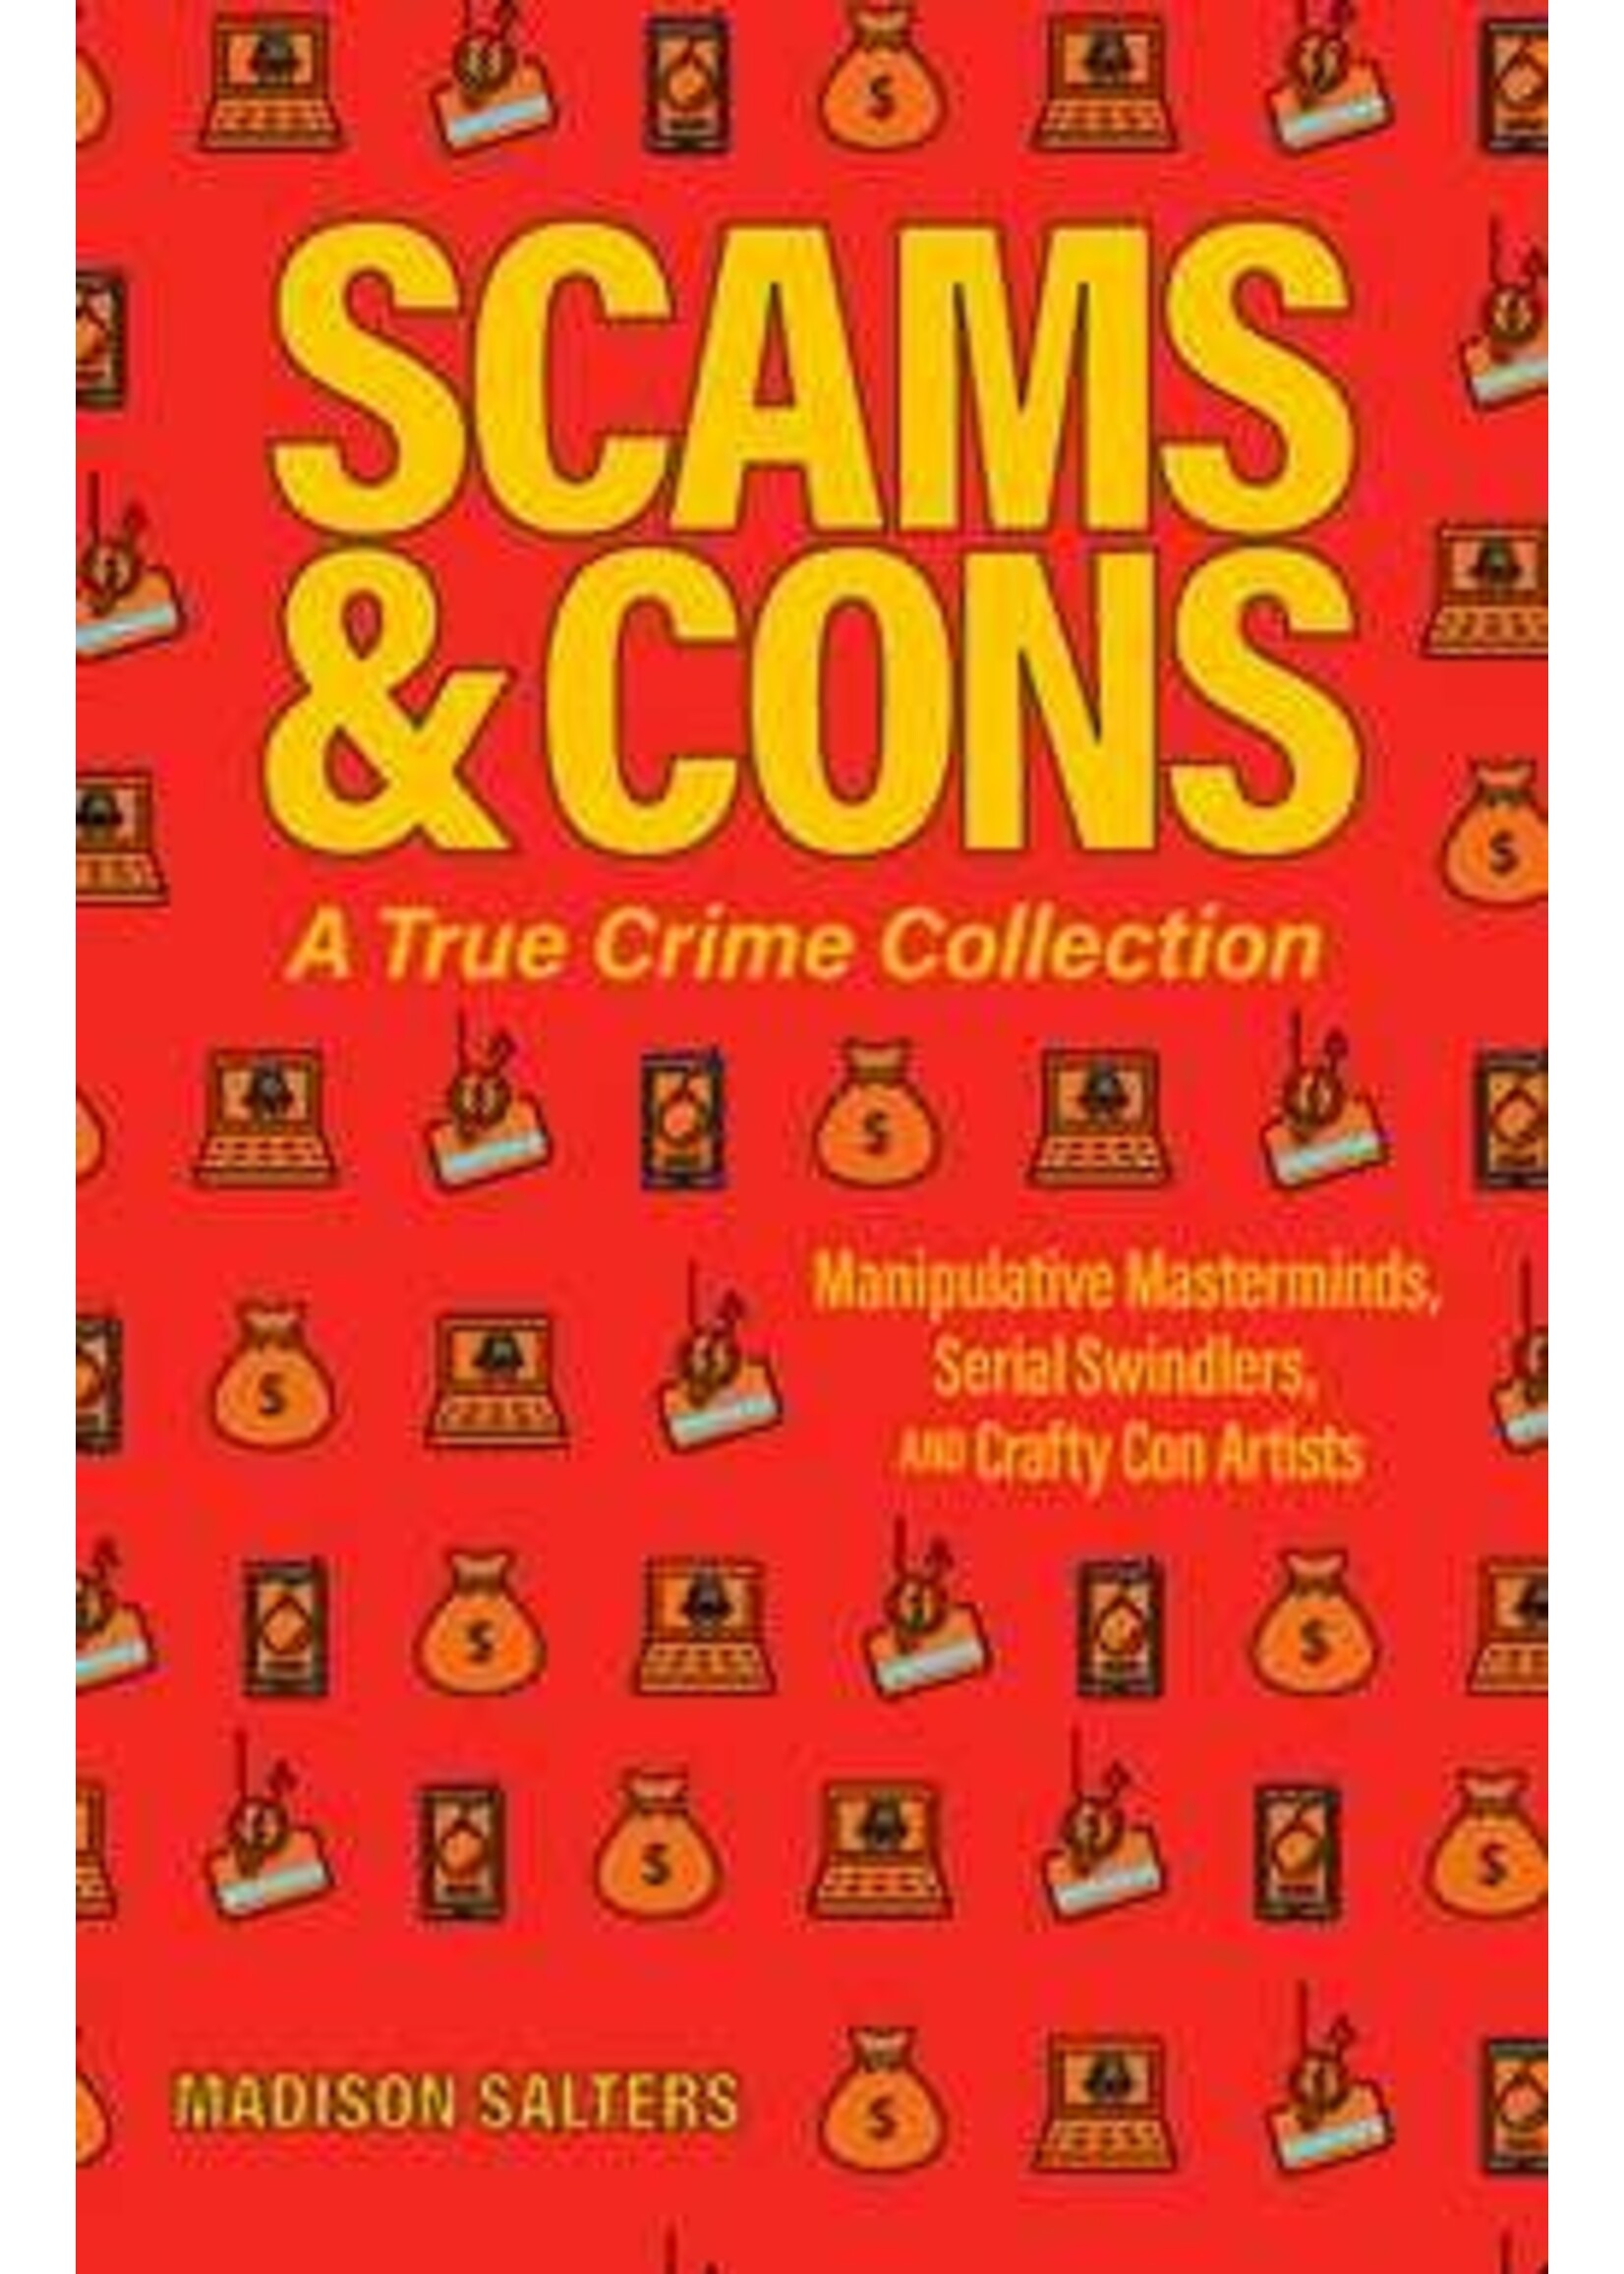 Scams and Cons: A True Crime Collection by Madison Salters